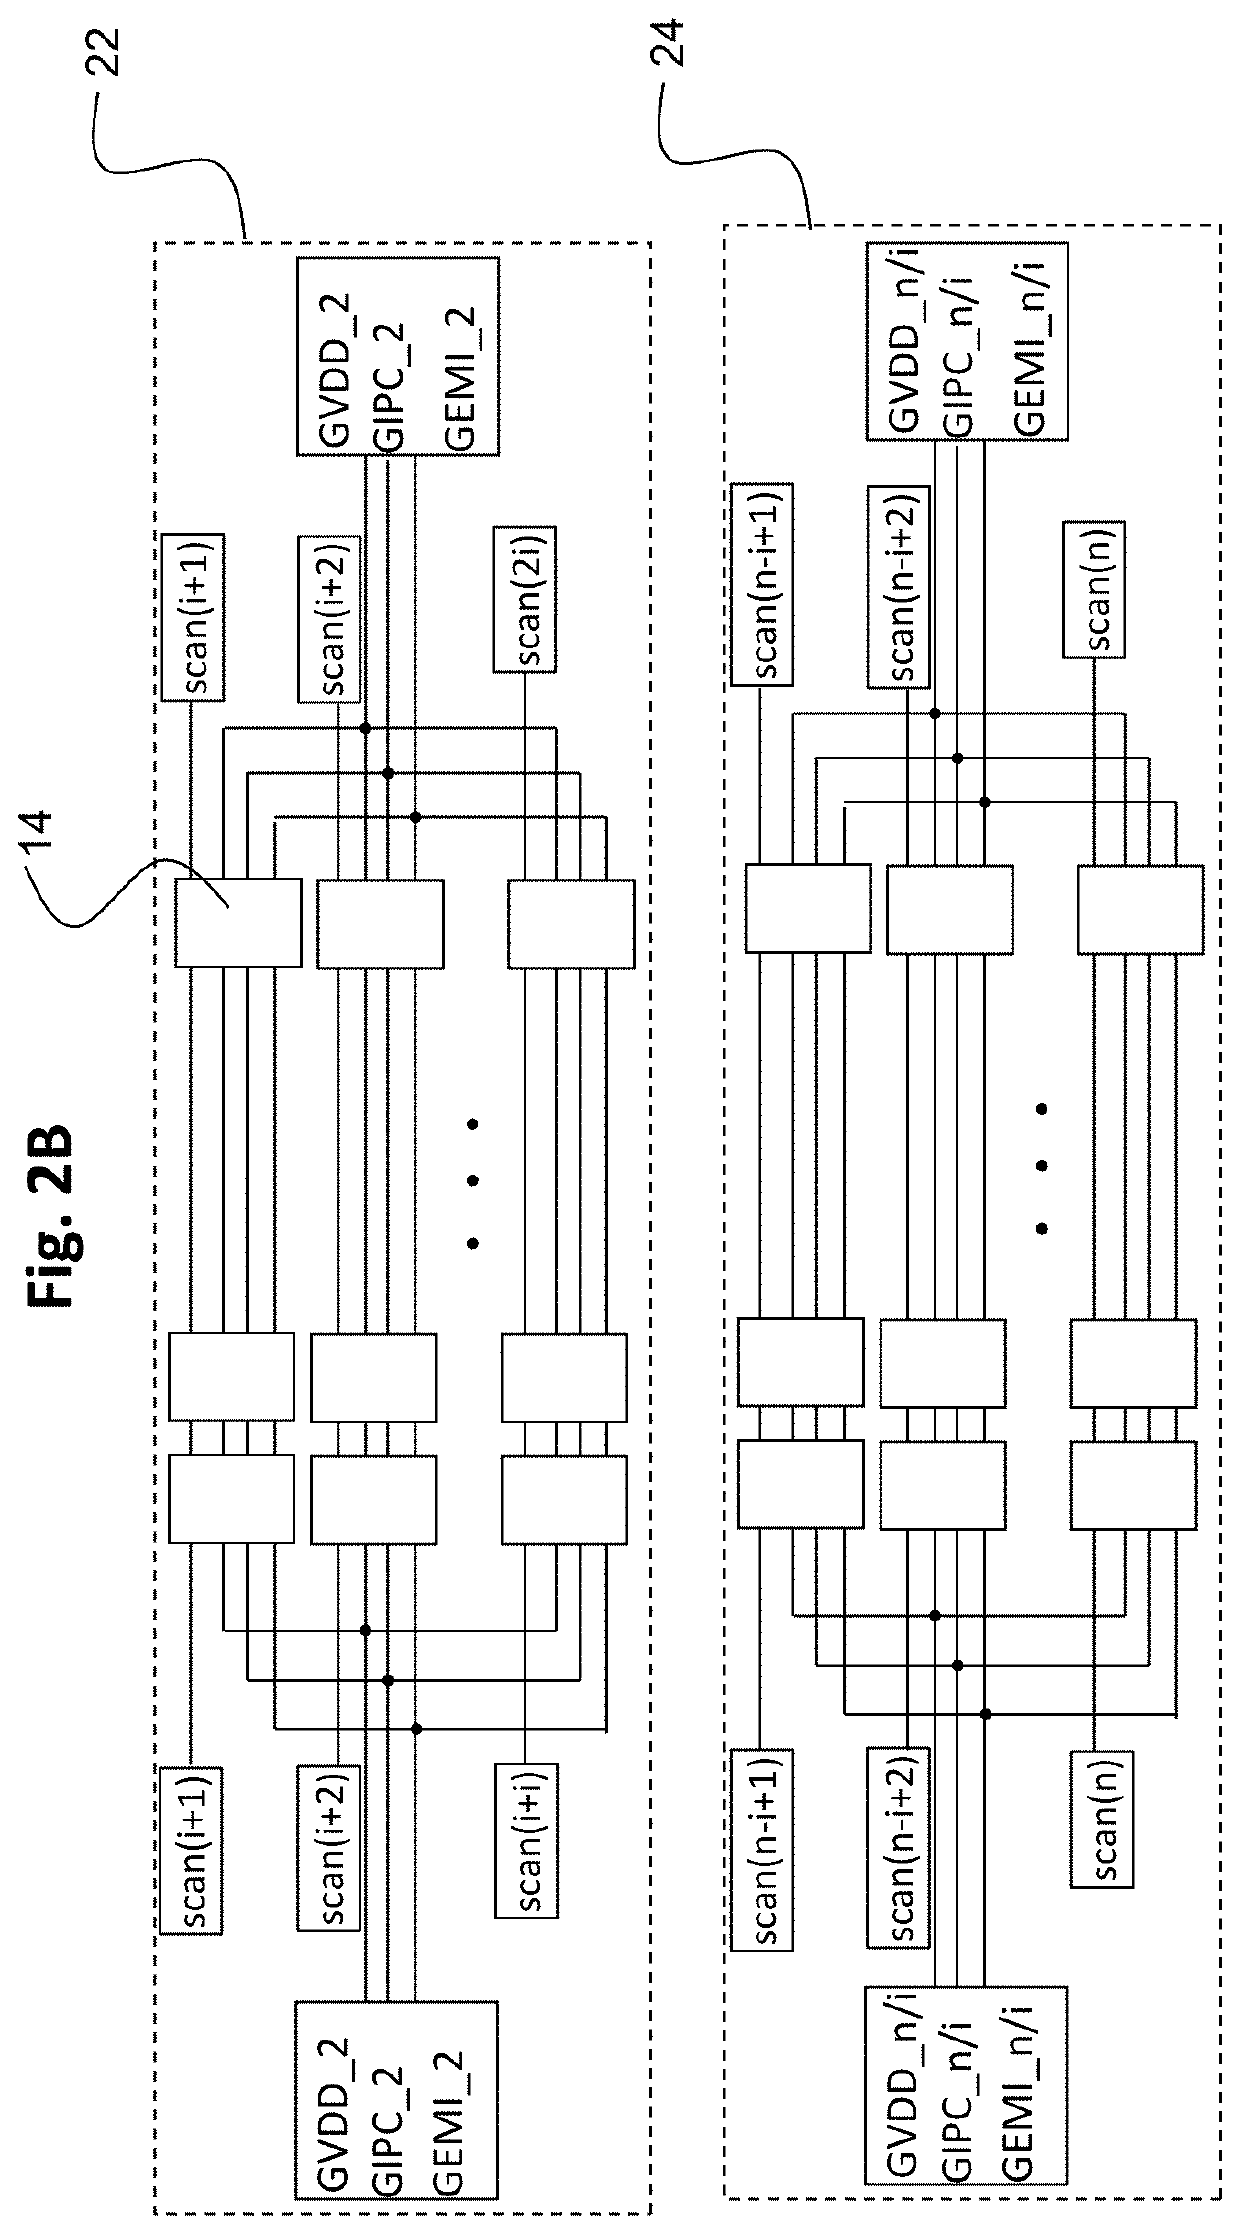 TFT pixel threshold voltage compensation circuit with short data programming time and low frame rate